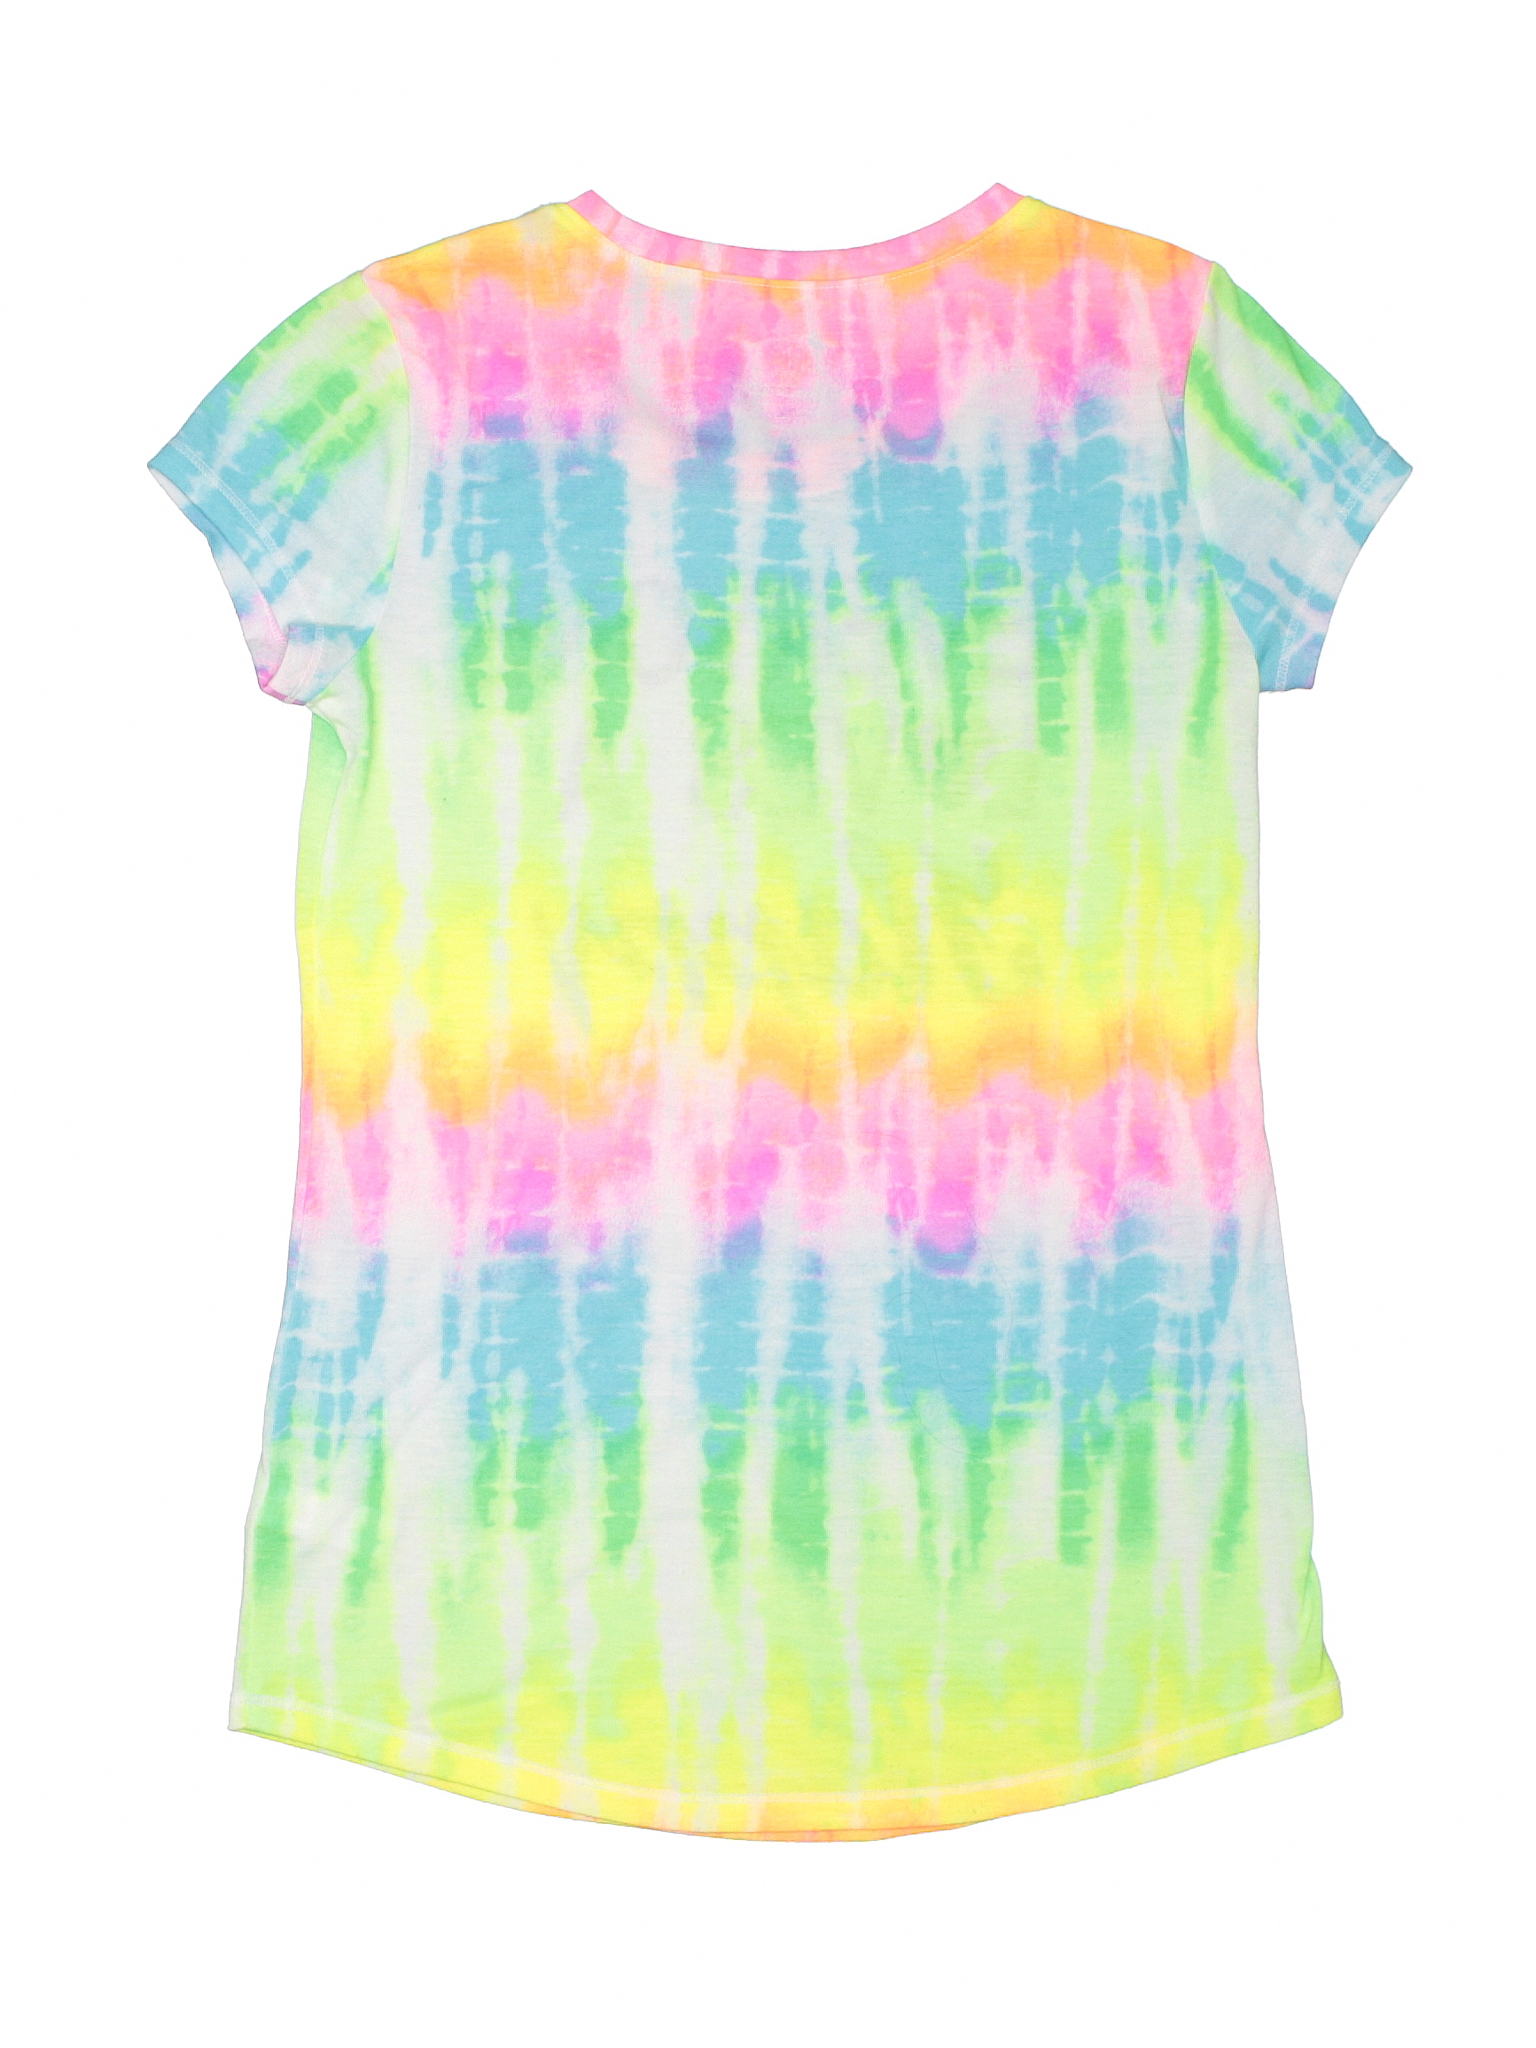 NWT Girls Justice Multi Color Tye Die Short Sleeve Top-Going Places Doing Things